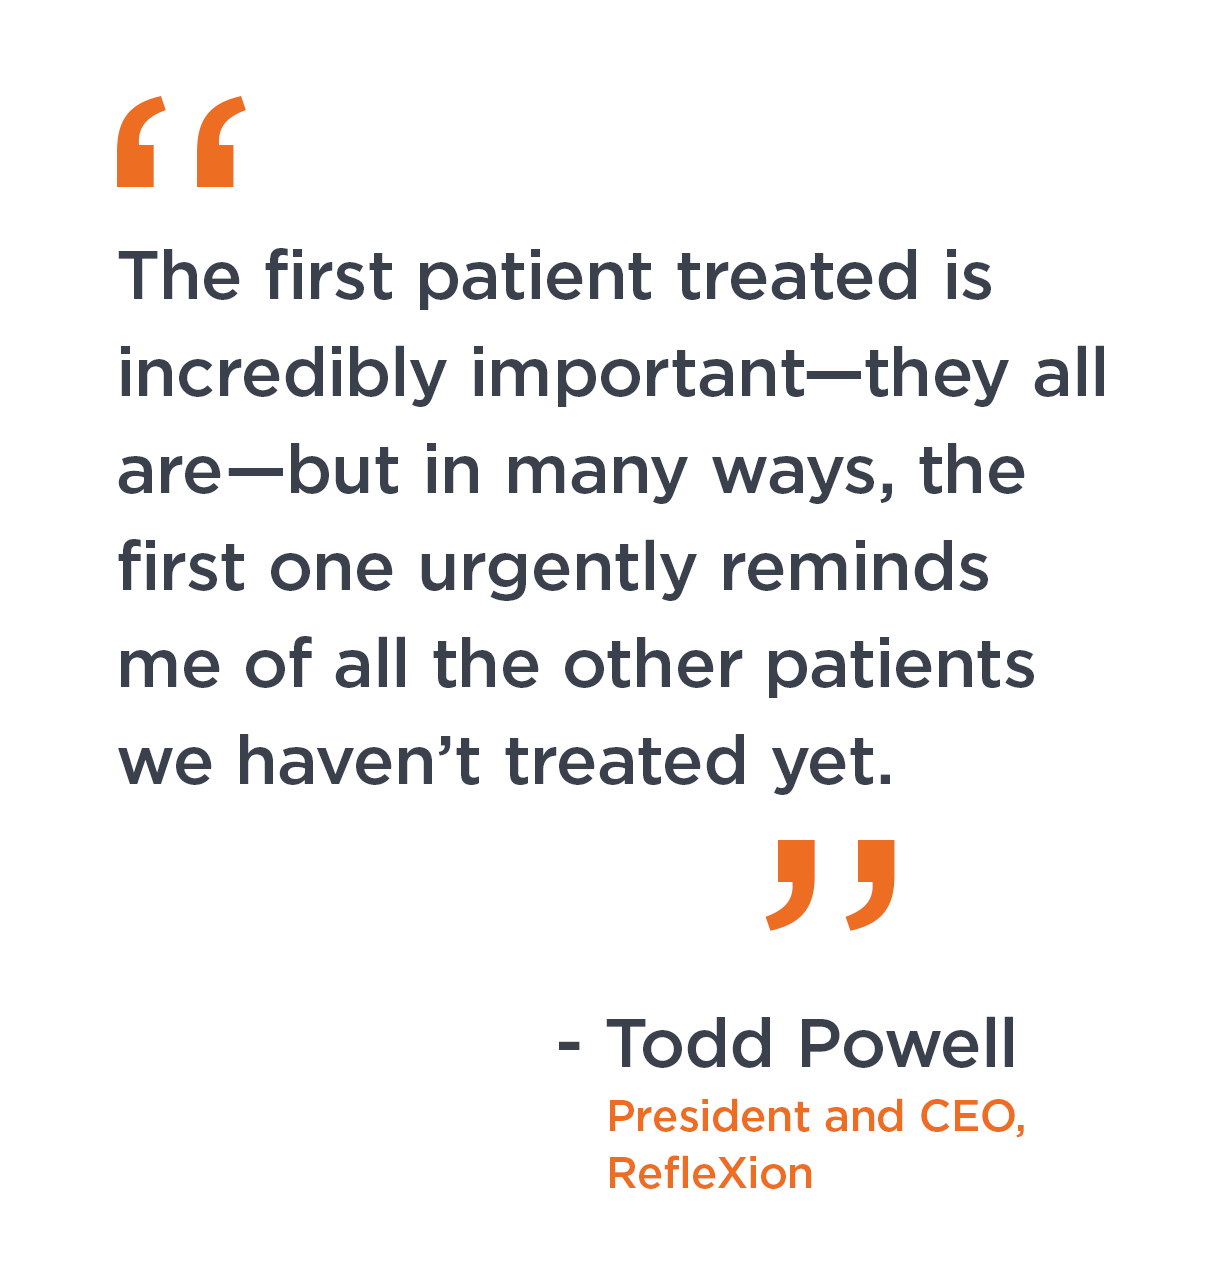 "The first patient treated is incredibly important—they all are—but in many ways, the first one urgently reminds me of all the other patients we haven’t treated yet." Todd Powell, president and CEO, RefleXion.